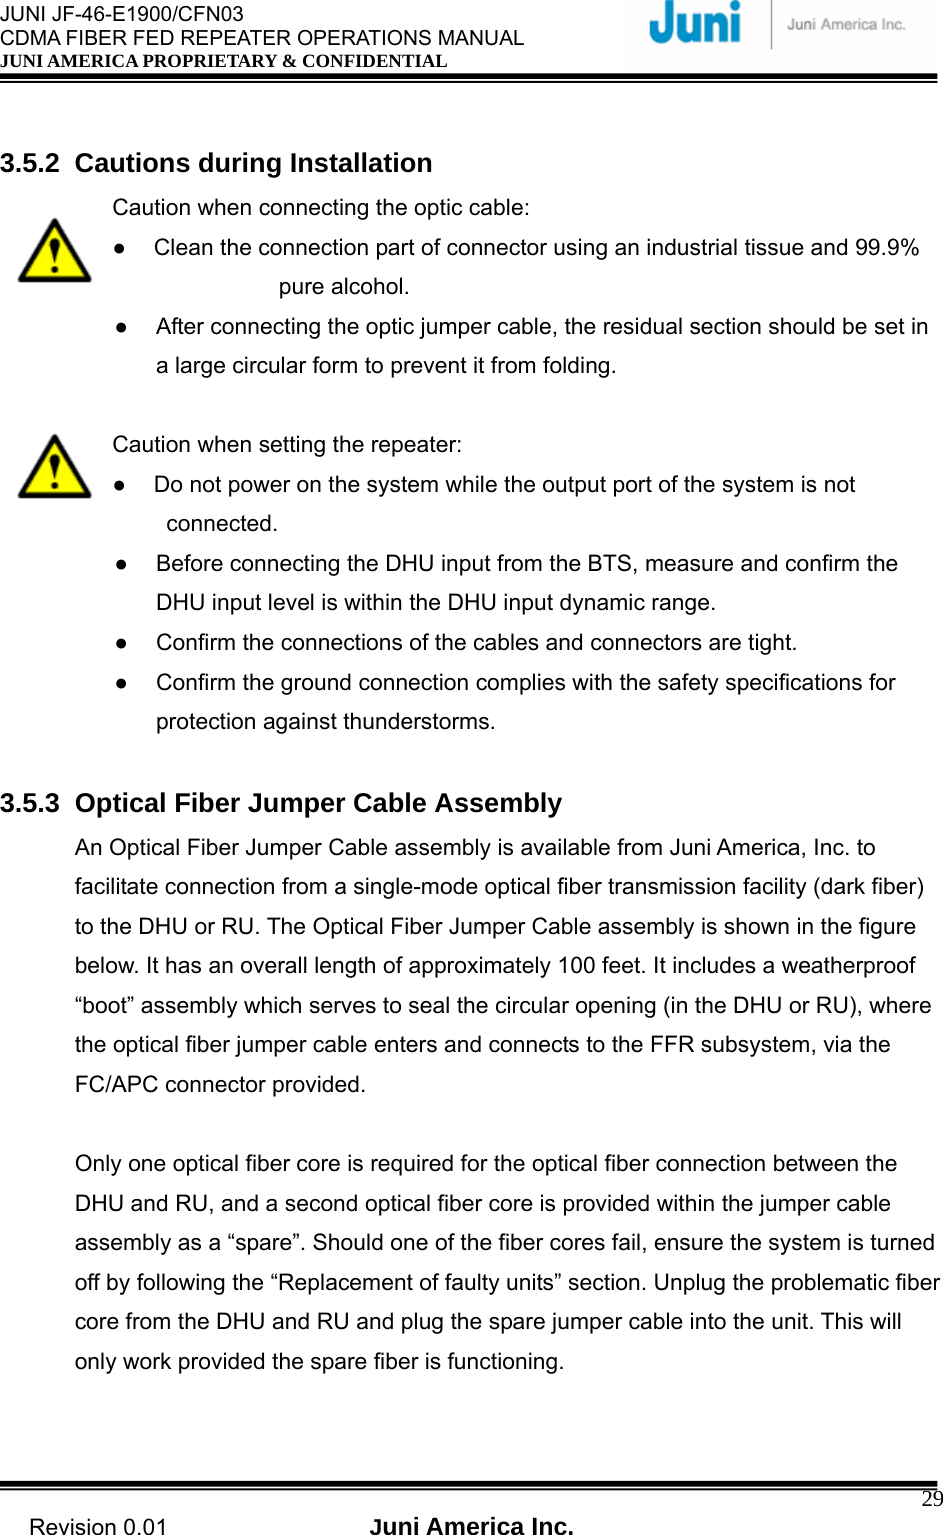  JUNI JF-46-E1900/CFN03 CDMA FIBER FED REPEATER OPERATIONS MANUAL JUNI AMERICA PROPRIETARY &amp; CONFIDENTIAL                                   Revision 0.01  Juni America Inc.  29 3.5.2 Cautions during Installation Caution when connecting the optic cable: ●  Clean the connection part of connector using an industrial tissue and 99.9%      pure alcohol. ●  After connecting the optic jumper cable, the residual section should be set in a large circular form to prevent it from folding.    Caution when setting the repeater: ●  Do not power on the system while the output port of the system is not      connected. ●  Before connecting the DHU input from the BTS, measure and confirm the DHU input level is within the DHU input dynamic range.   ●  Confirm the connections of the cables and connectors are tight. ●  Confirm the ground connection complies with the safety specifications for protection against thunderstorms.  3.5.3  Optical Fiber Jumper Cable Assembly An Optical Fiber Jumper Cable assembly is available from Juni America, Inc. to facilitate connection from a single-mode optical fiber transmission facility (dark fiber) to the DHU or RU. The Optical Fiber Jumper Cable assembly is shown in the figure below. It has an overall length of approximately 100 feet. It includes a weatherproof “boot” assembly which serves to seal the circular opening (in the DHU or RU), where the optical fiber jumper cable enters and connects to the FFR subsystem, via the FC/APC connector provided.    Only one optical fiber core is required for the optical fiber connection between the DHU and RU, and a second optical fiber core is provided within the jumper cable assembly as a “spare”. Should one of the fiber cores fail, ensure the system is turned off by following the “Replacement of faulty units” section. Unplug the problematic fiber core from the DHU and RU and plug the spare jumper cable into the unit. This will only work provided the spare fiber is functioning.  